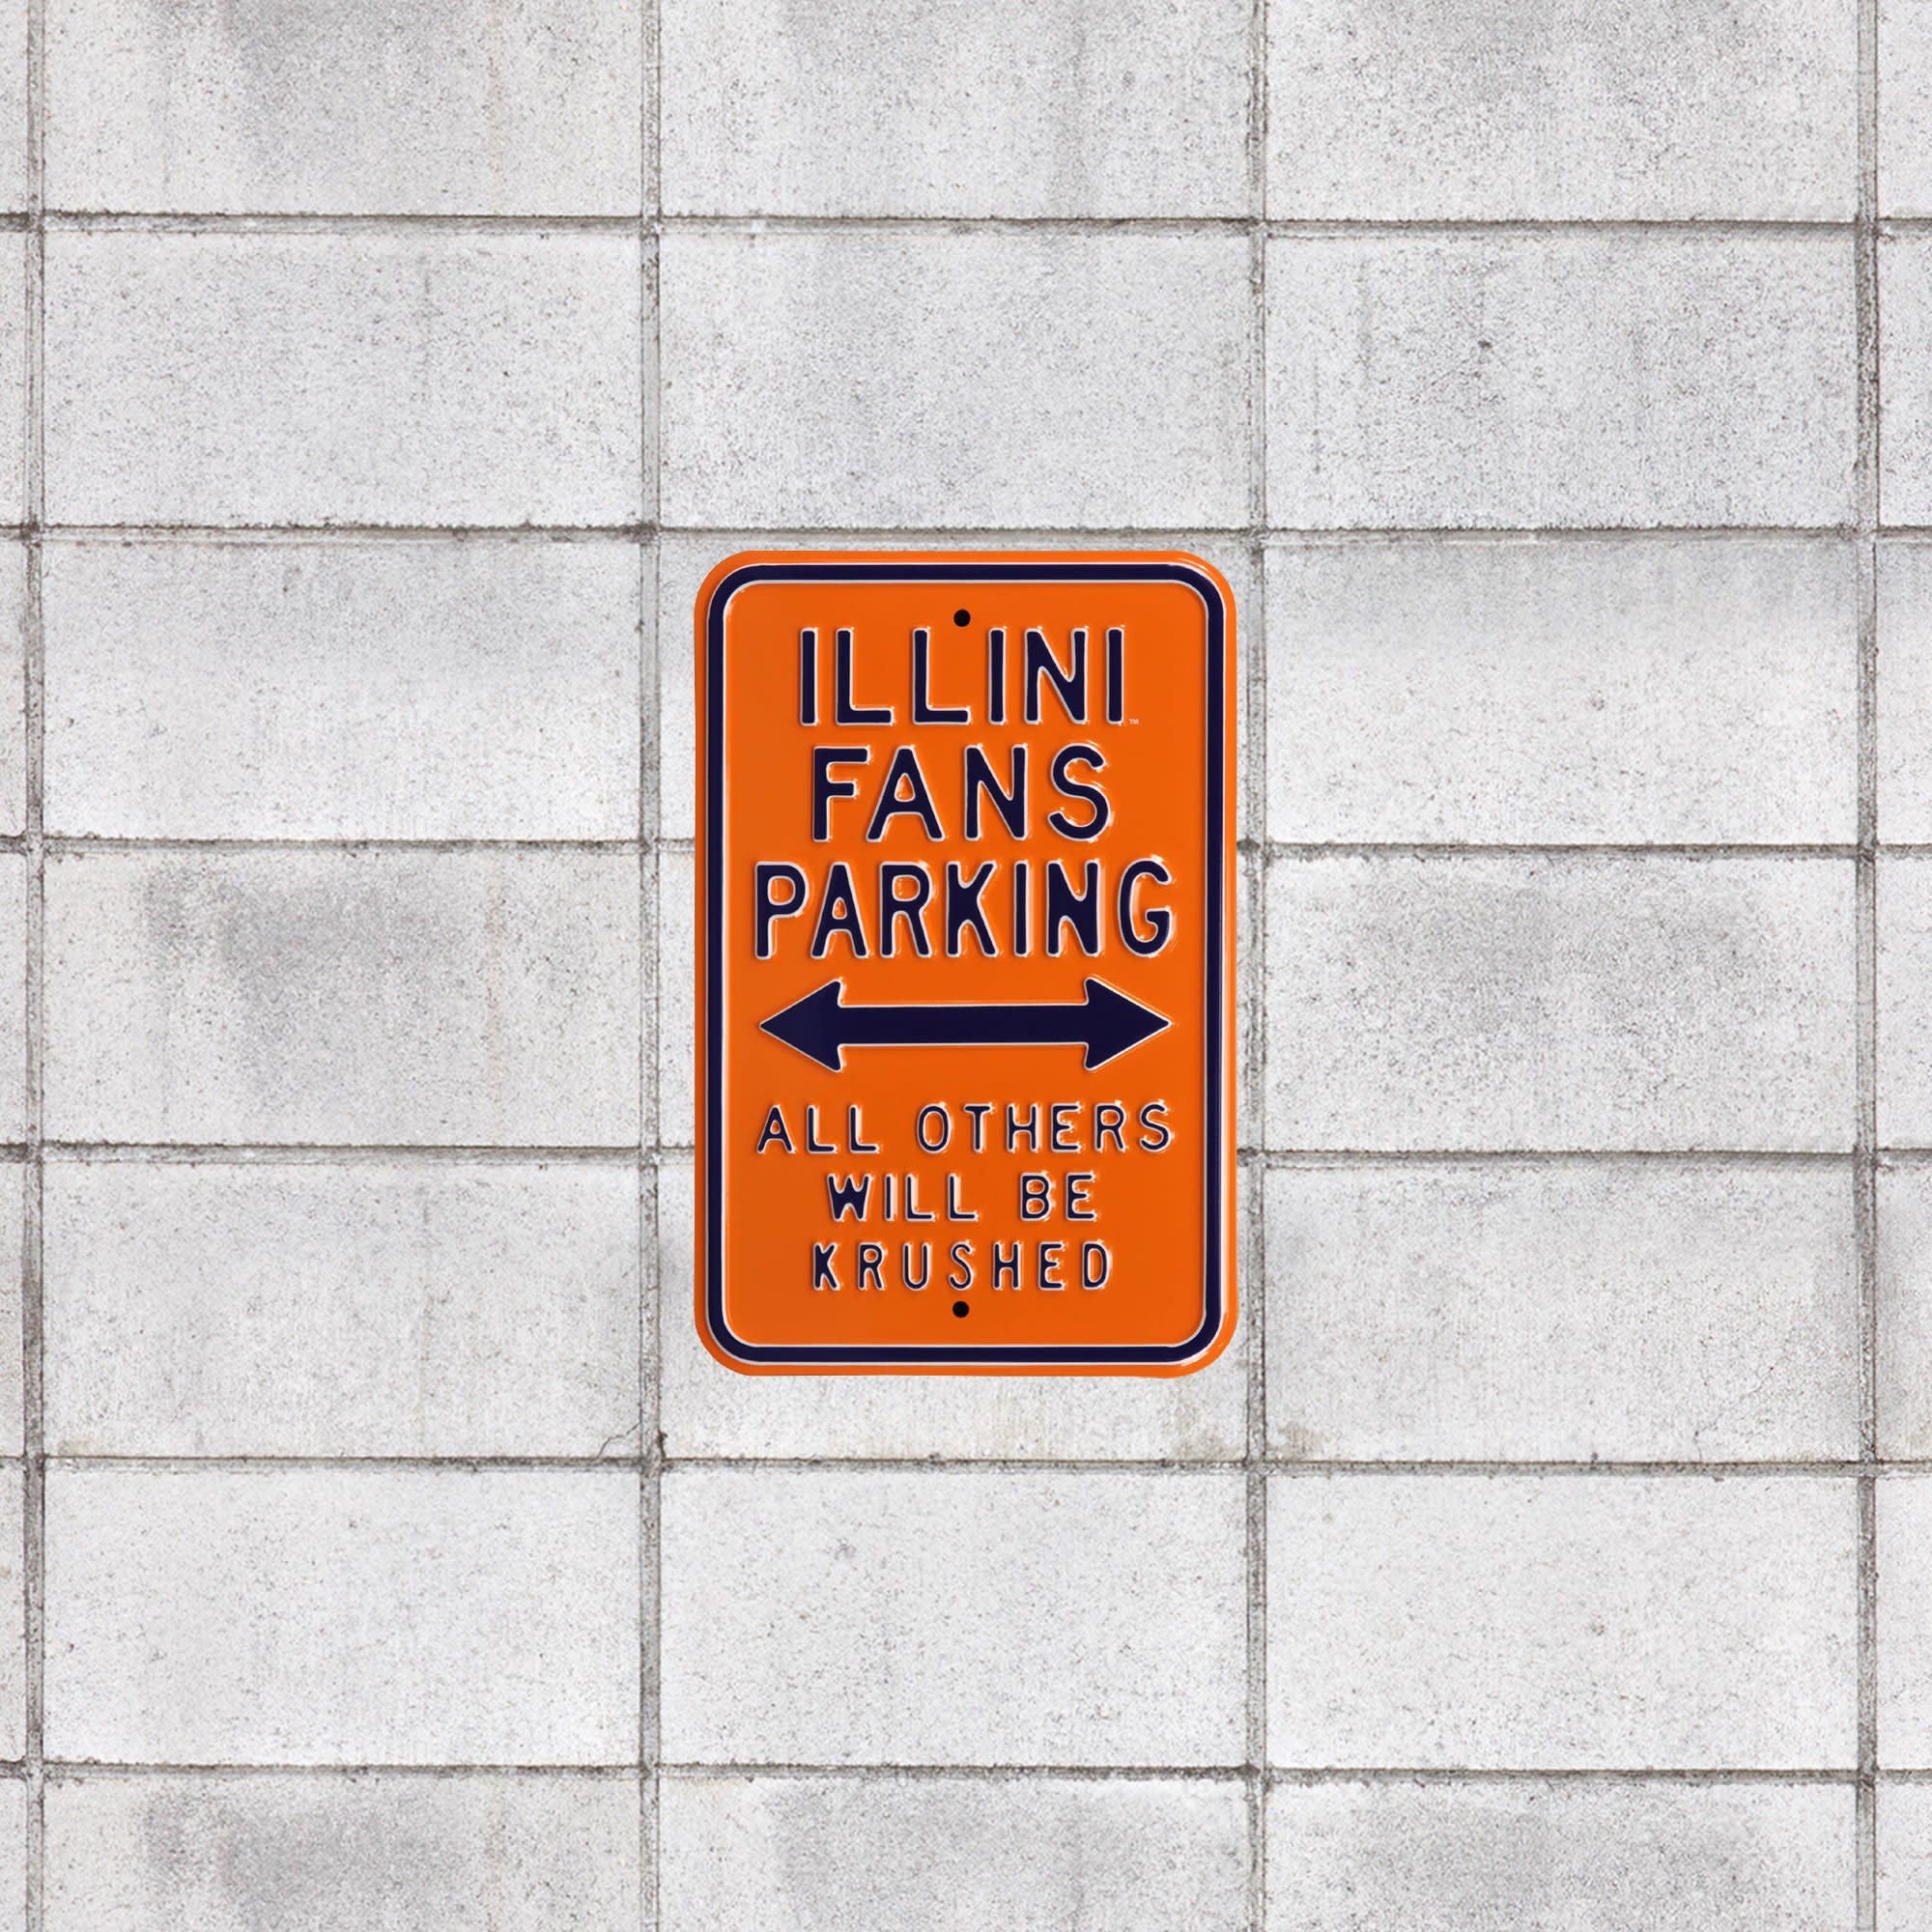 Illinois Fighting Illini: Krushed Parking - Officially Licensed Metal Street Sign 18.0"W x 12.0"H by Fathead | 100% Steel